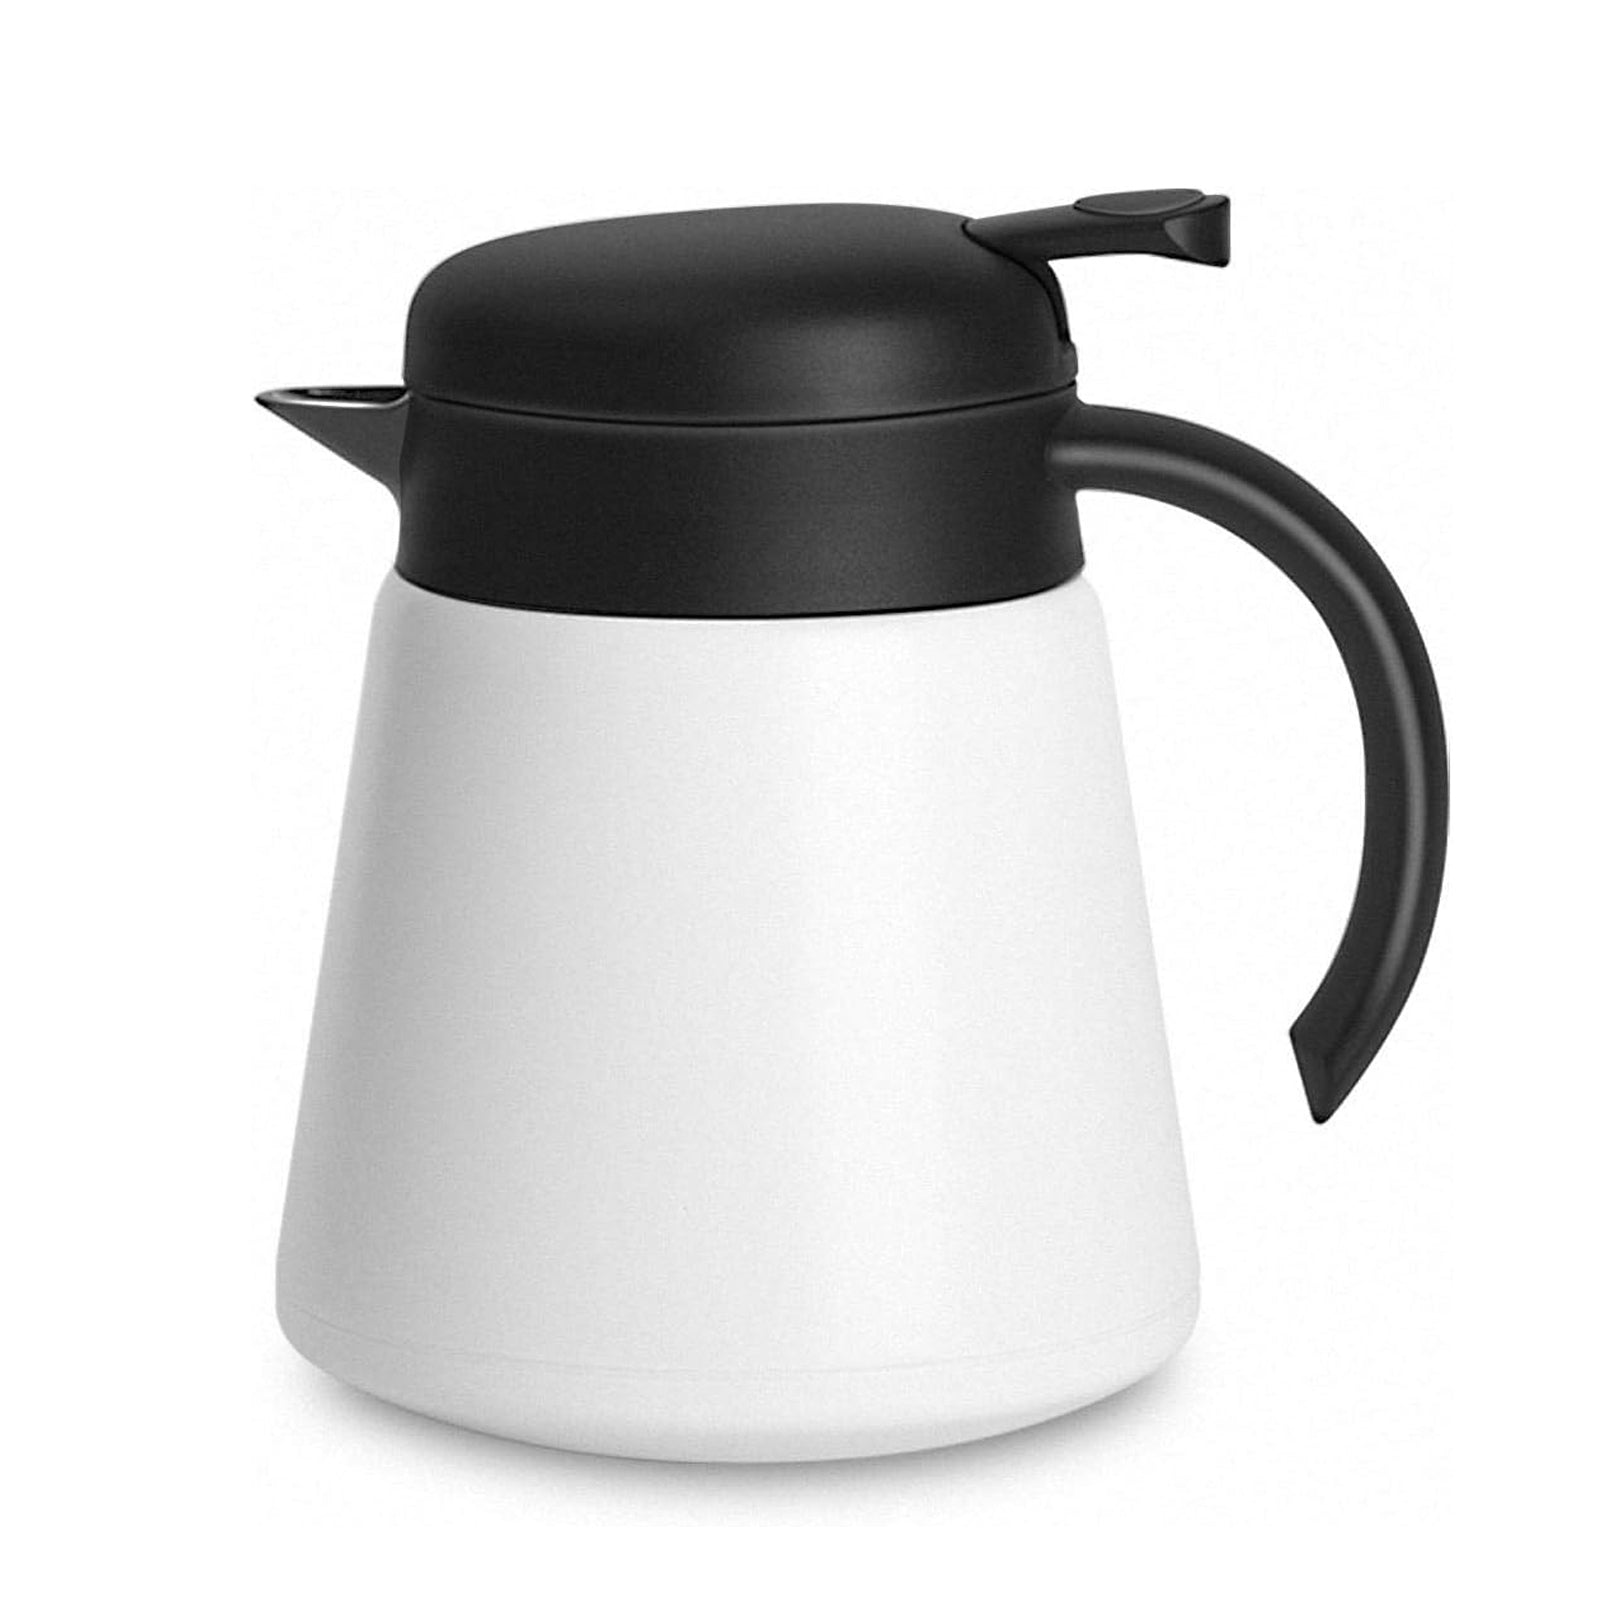  Lafeeca Thermal Coffee Carafe Tea Pot Stainless Steel, Double  Wall Vacuum Insulated, Cool Touch Handle, Hot & Cold Retention, Non-Slip  Silicone Base